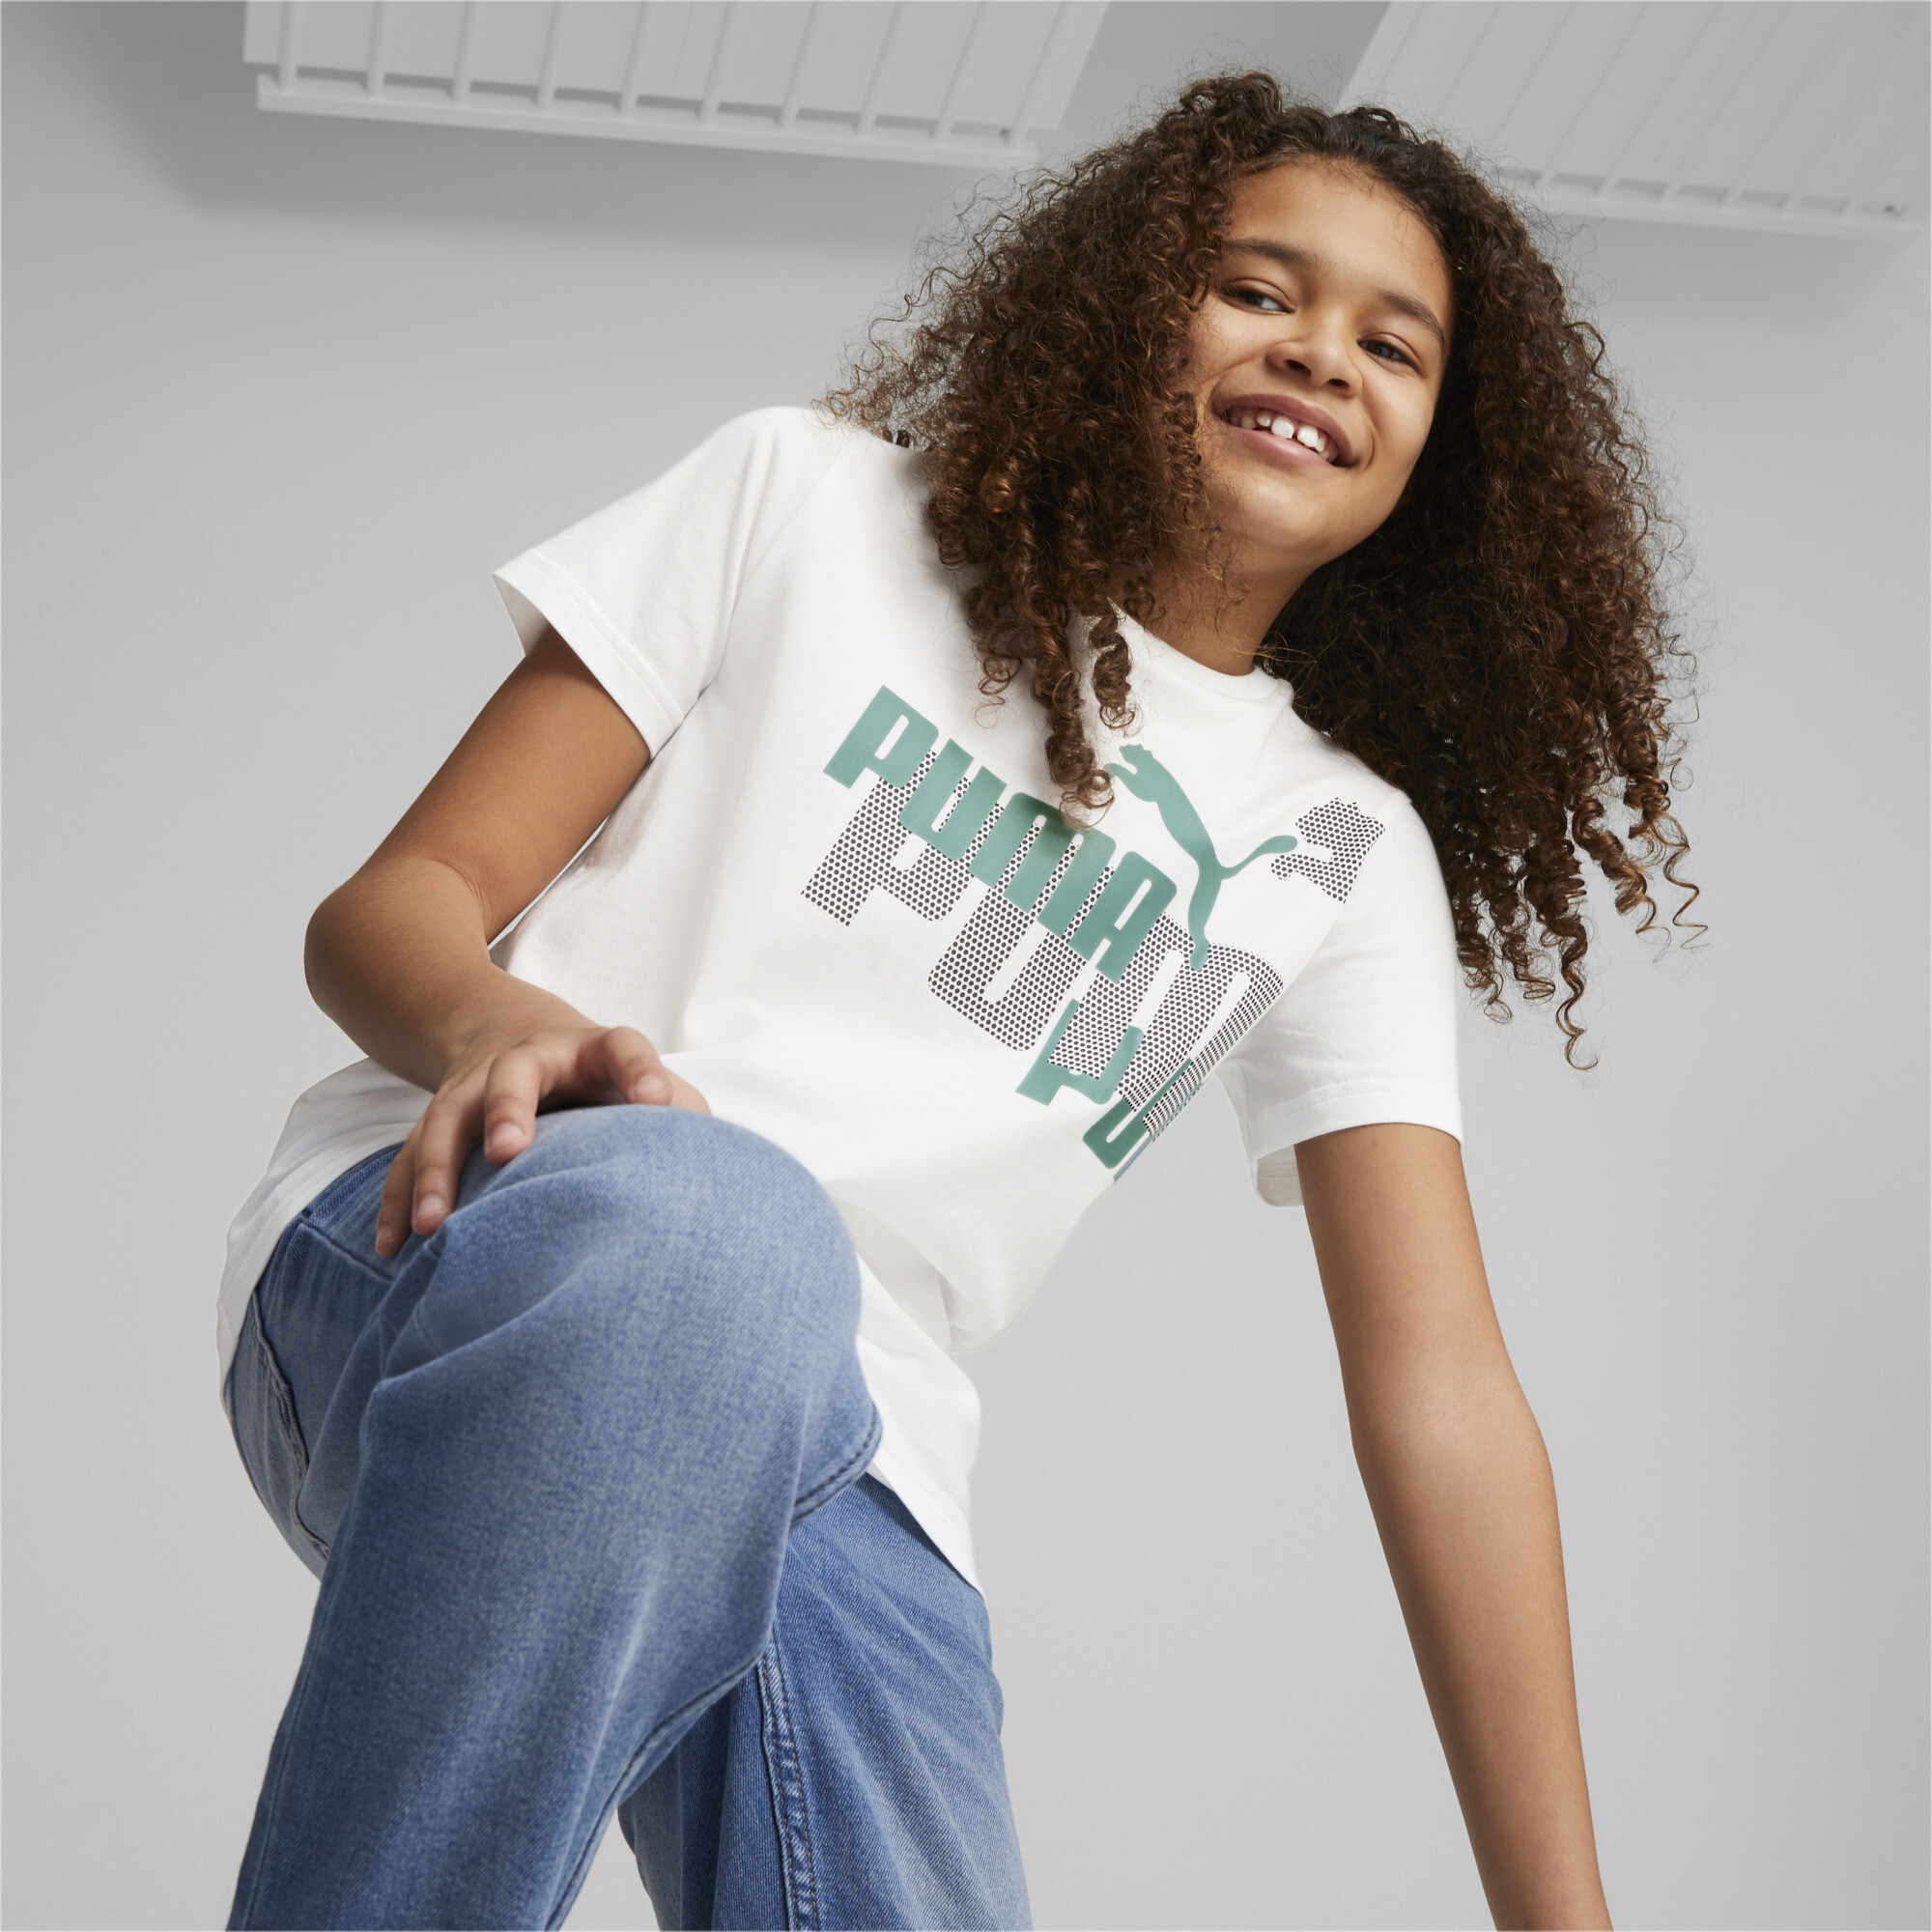 PUMA ESS+ LOGO POWER T-Shirt In White, Size 5-6 Youth